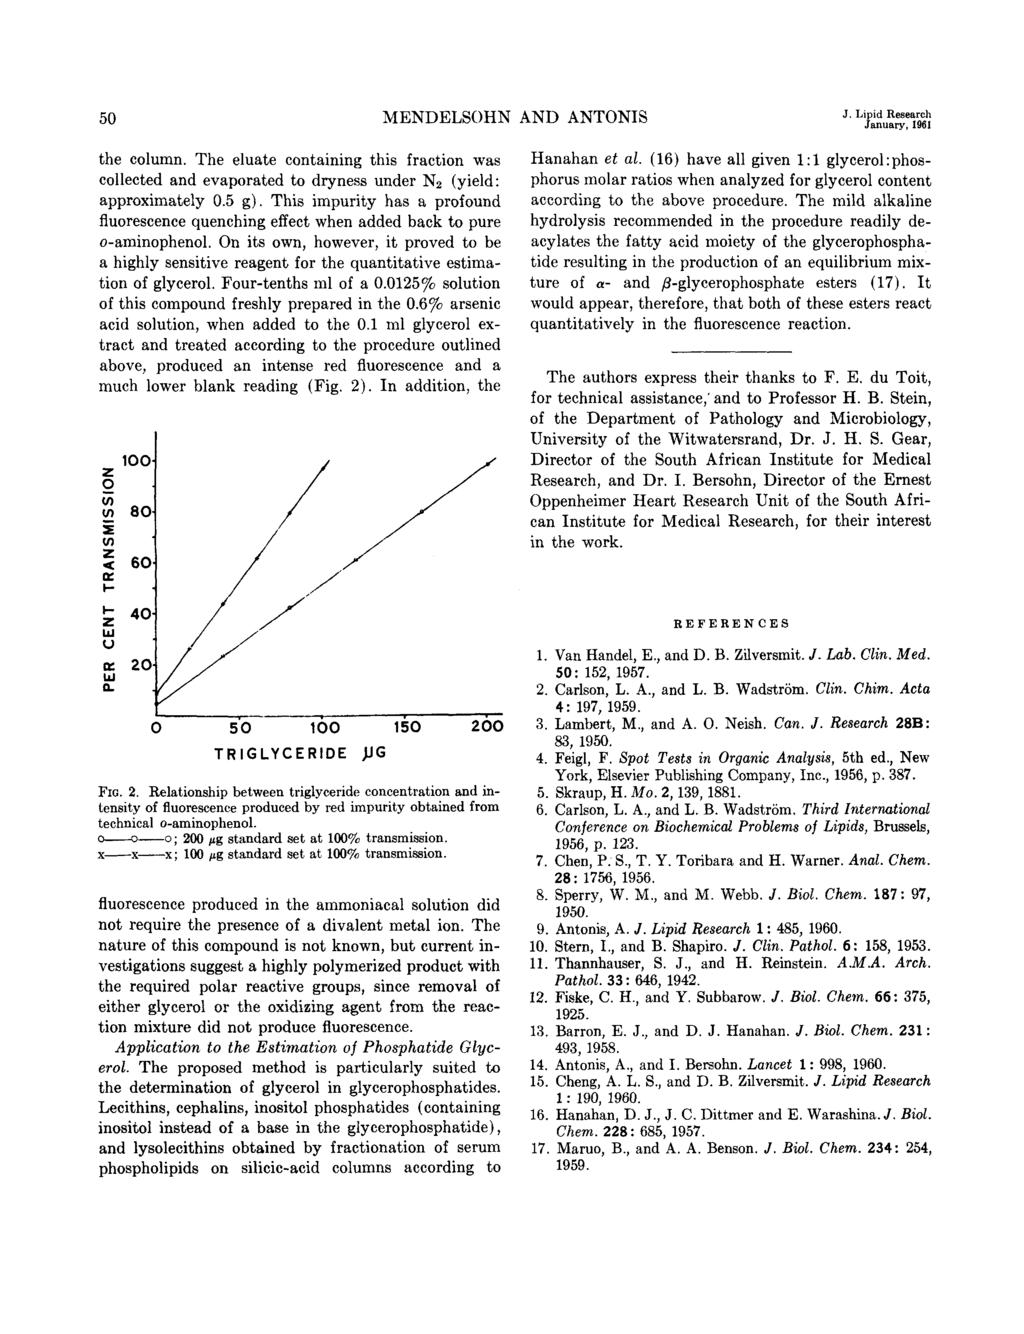 50 MENDELSOHN AND ANTONIS J. Lipid Research January, 1961 the column. The eluate containing this fraction was collected and evaporated to dryness under NP (yield: approximately 0.5 g).